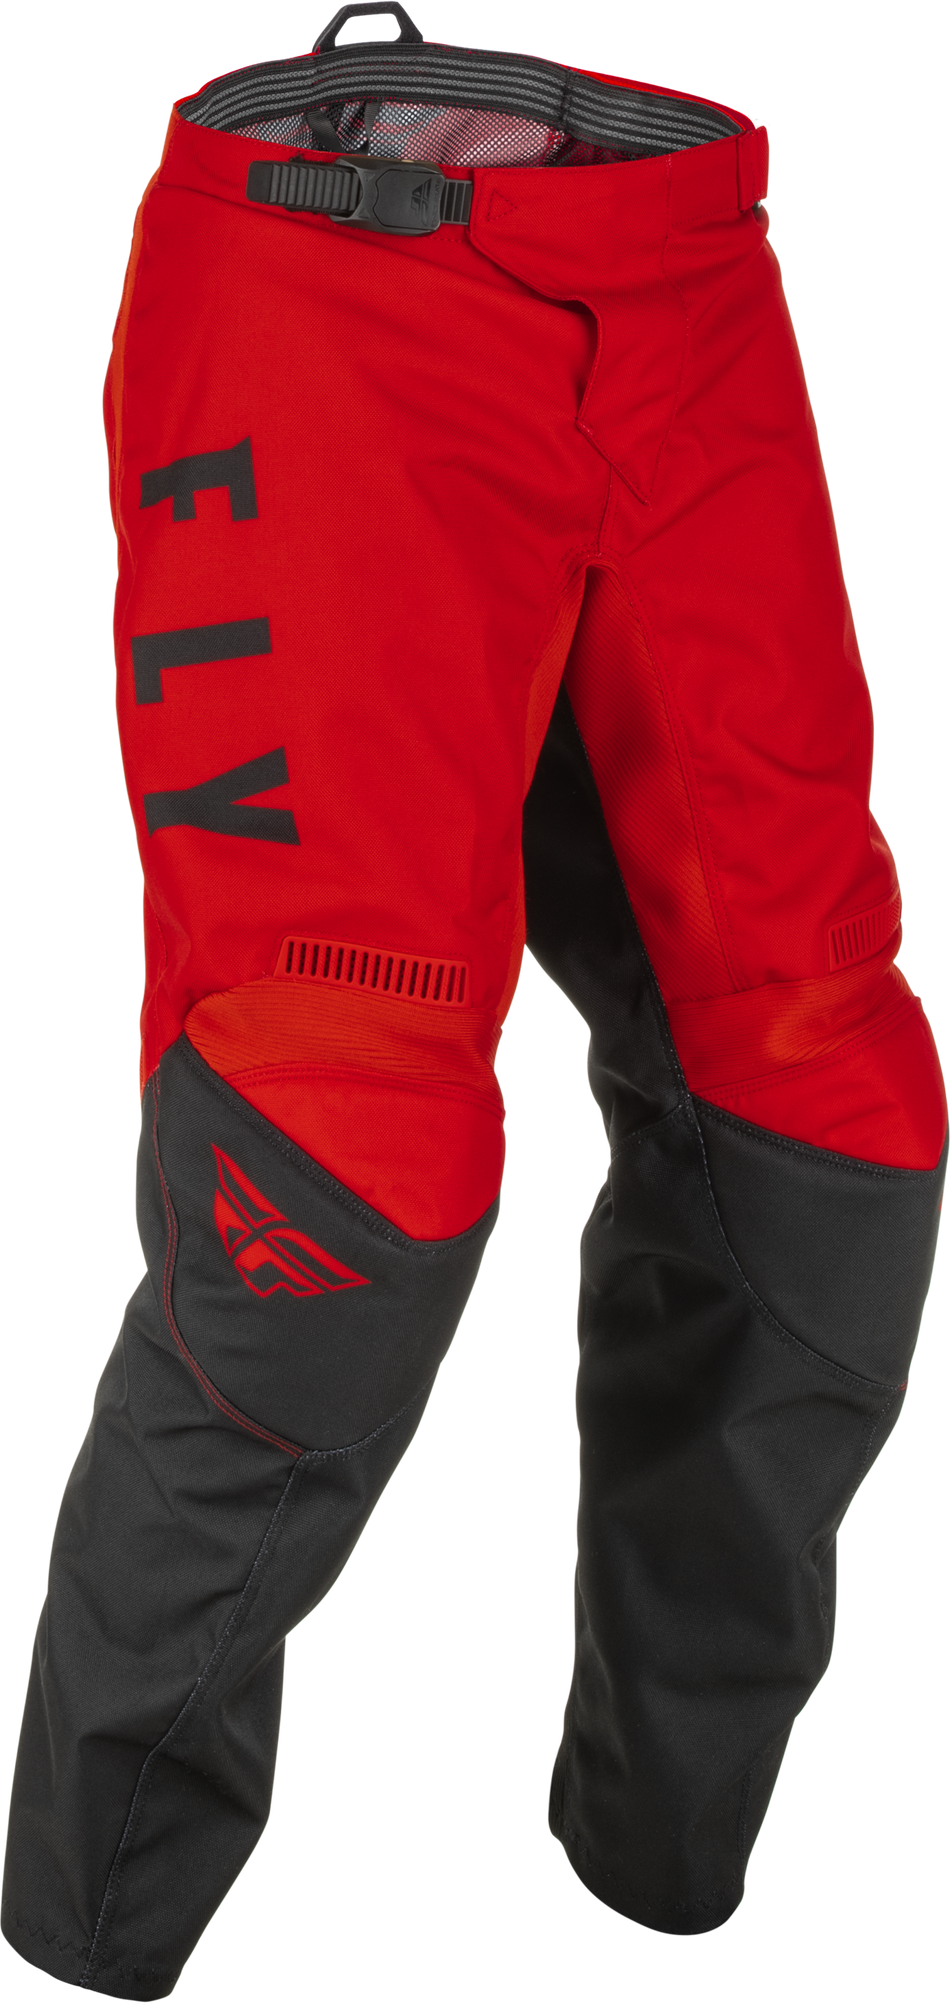 FLY RACING Youth F-16 Pants Red/Black Sz 24 375-93324